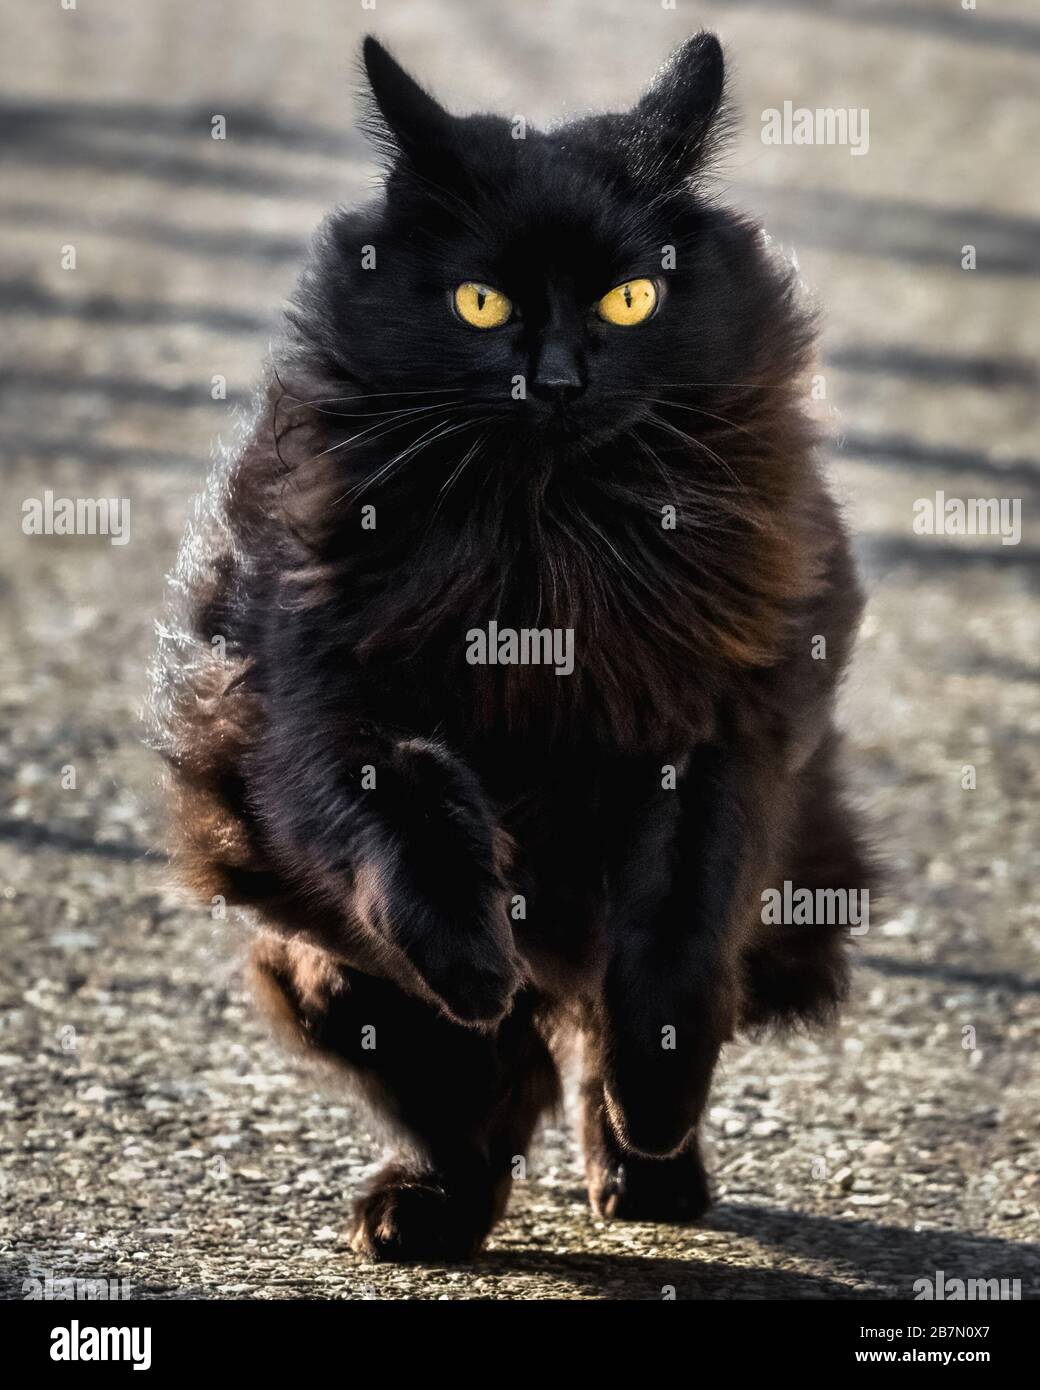 A black cat with yellow eyes is running in Ticino, Switzerland, in a sunny day. Concrete background Stock Photo